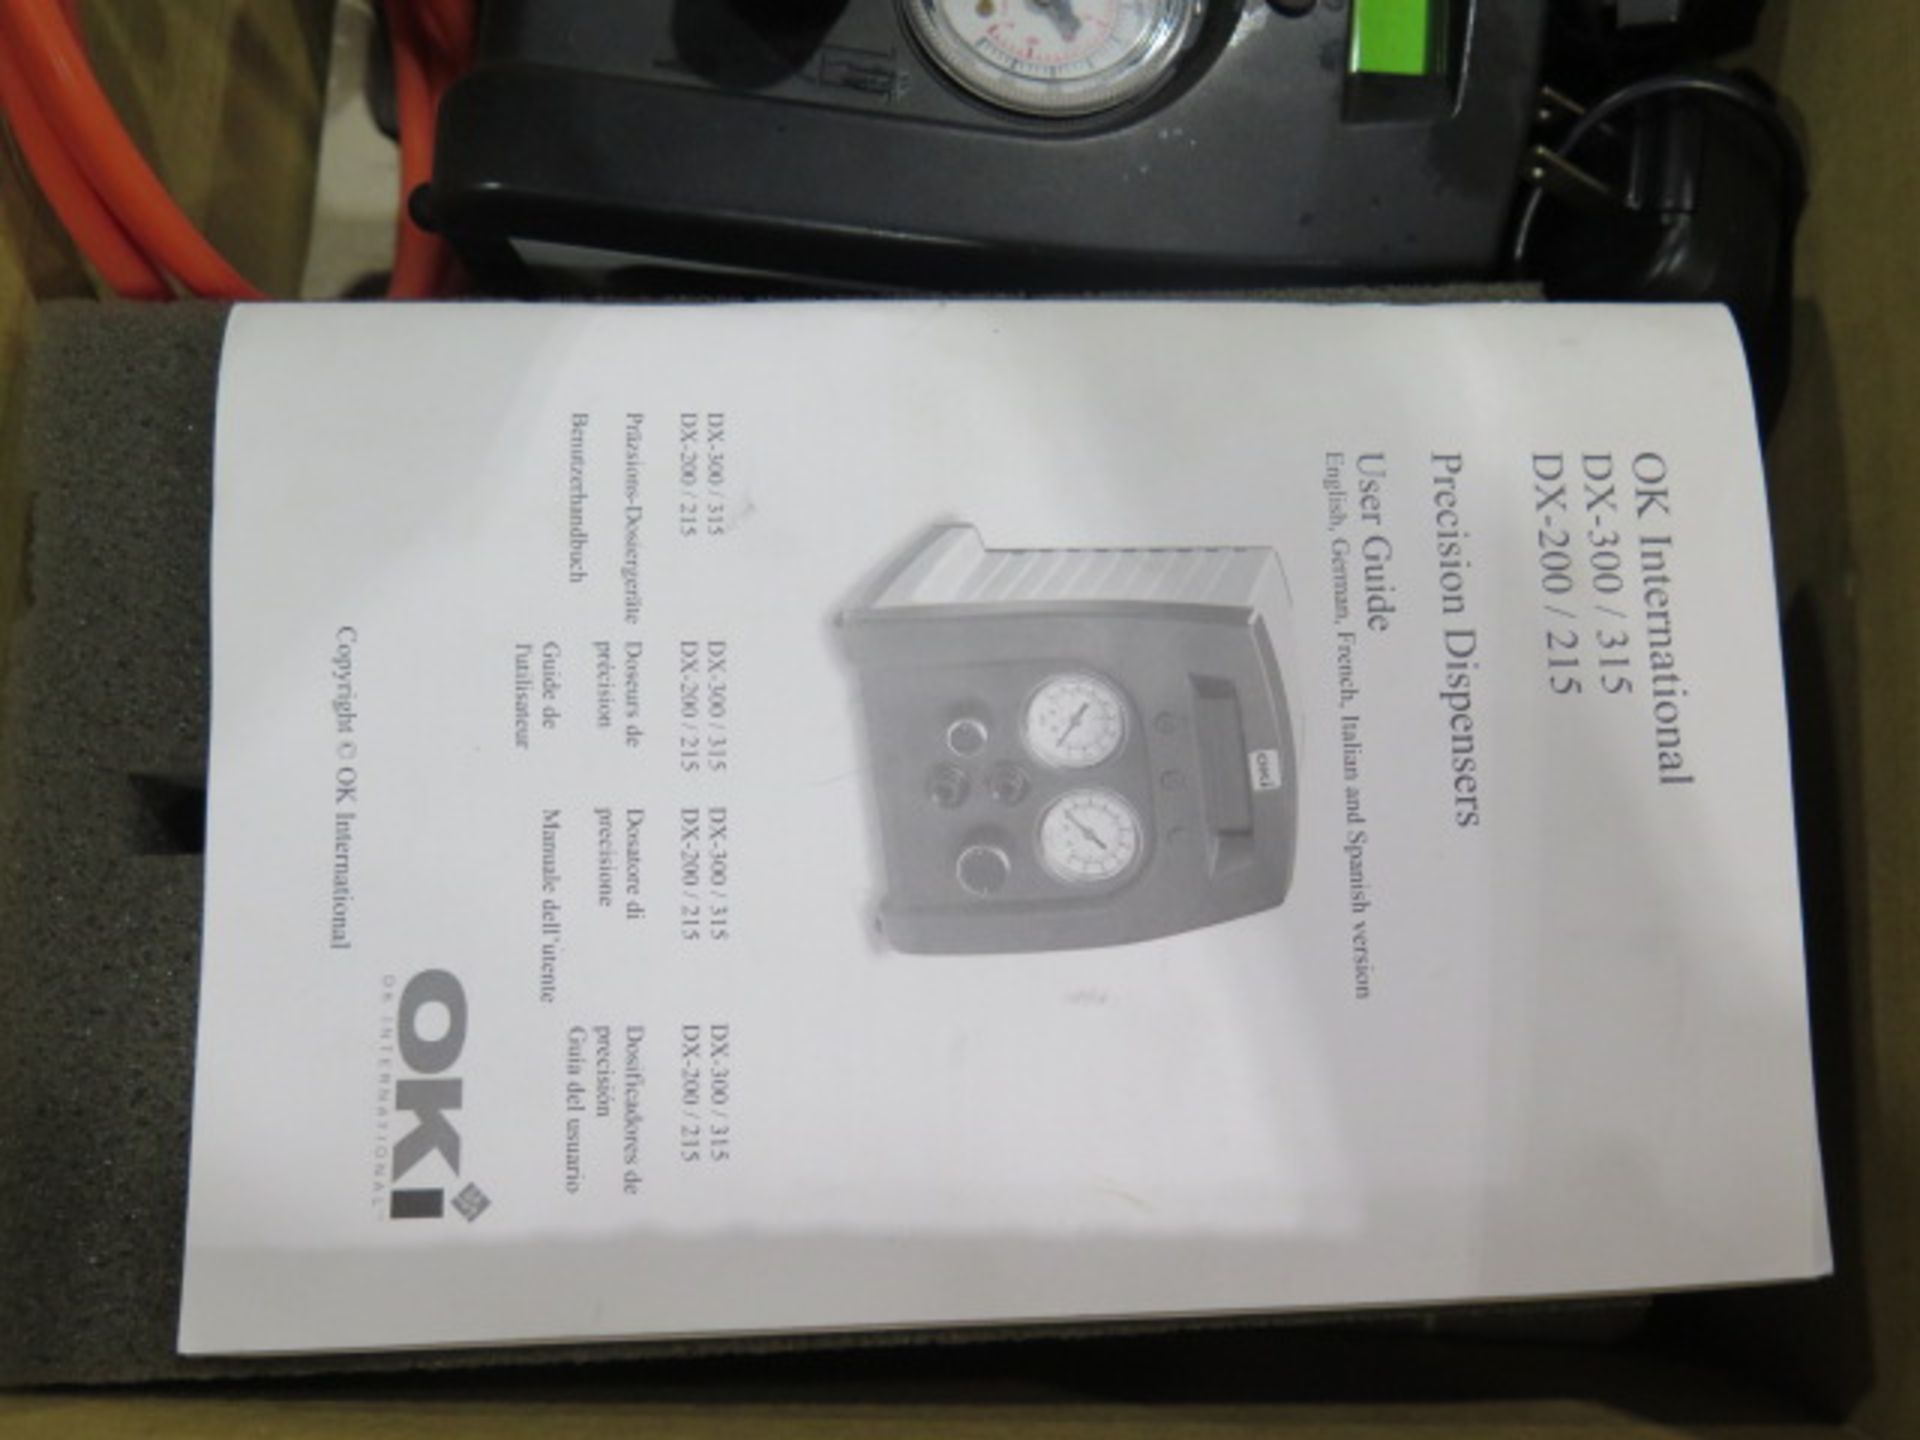 OKI DX-300 Precision Dispensing System s/n 001529 (SOLD AS-IS - NO WARRANTY) - Image 6 of 6